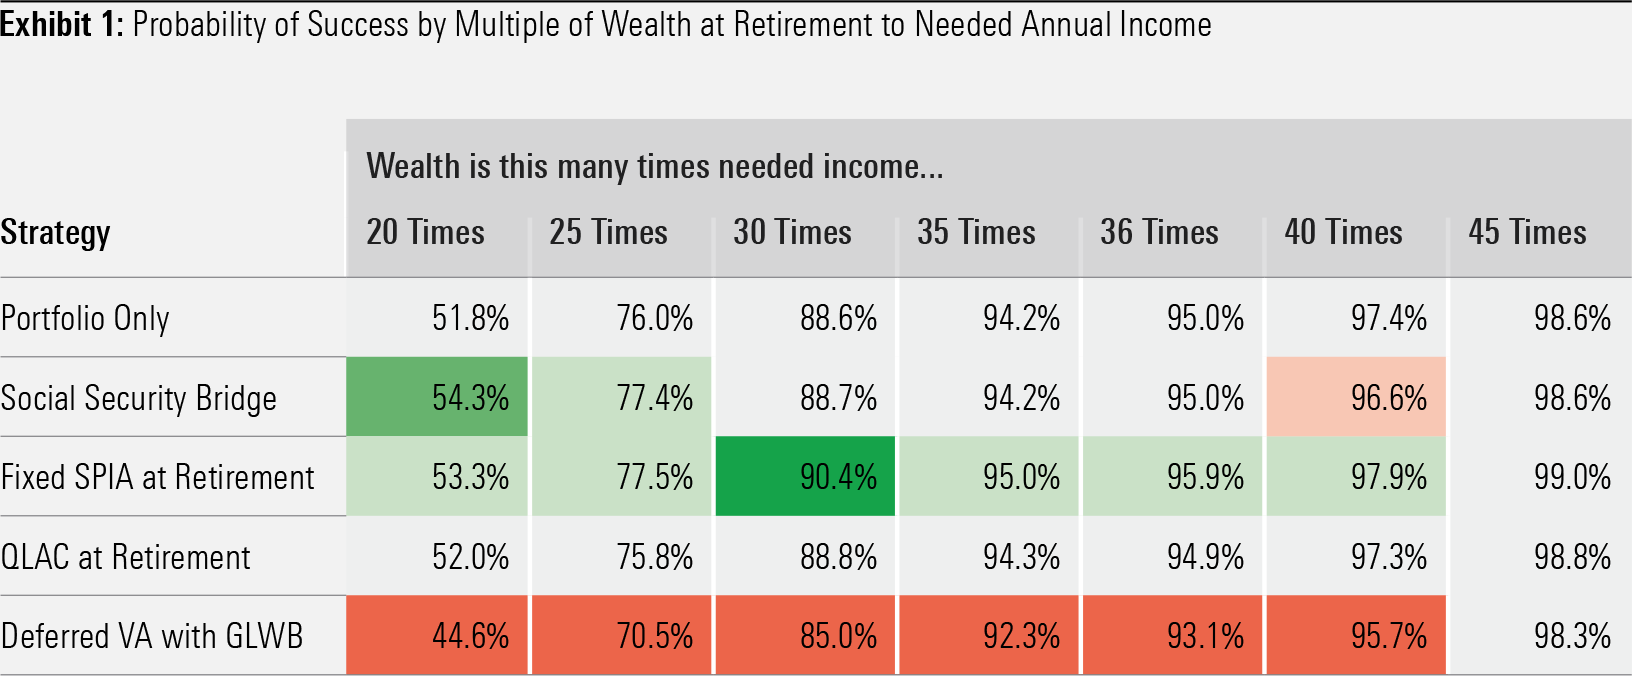 Table showing the wealth a person needs to have, compared to their annual income, to have etirement strategies succeed.